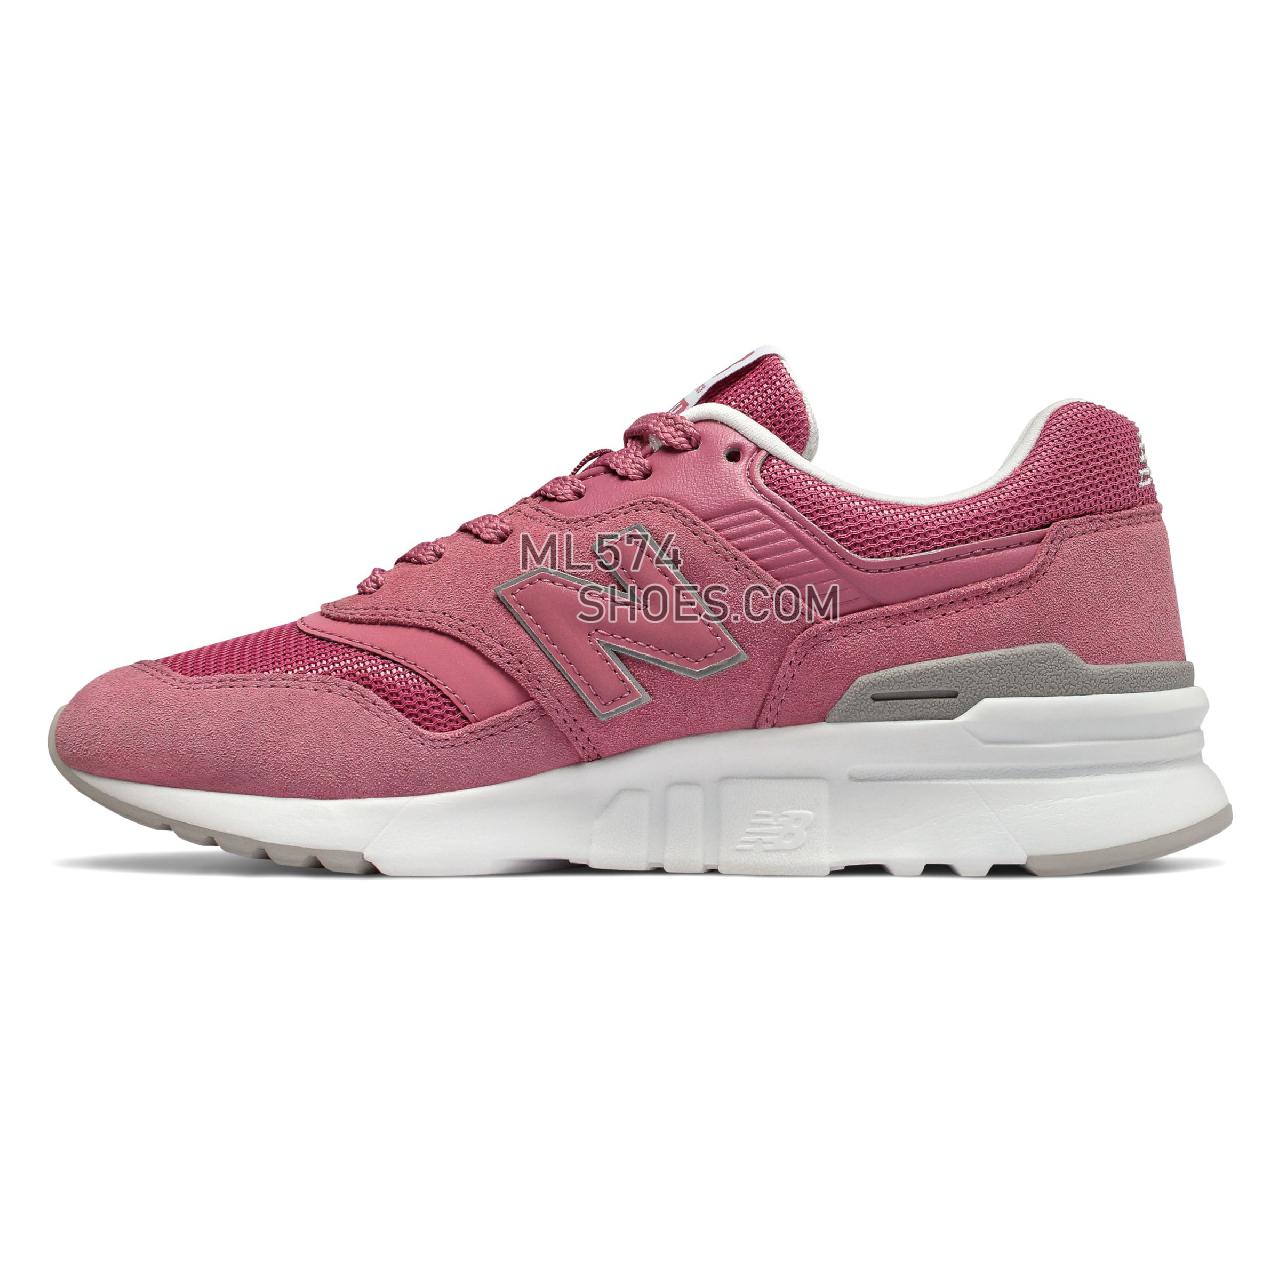 New Balance 997H Classic Essential - Women's Sport Style Sneakers - Mineral Rose with Light Cyclone - CW997HCB